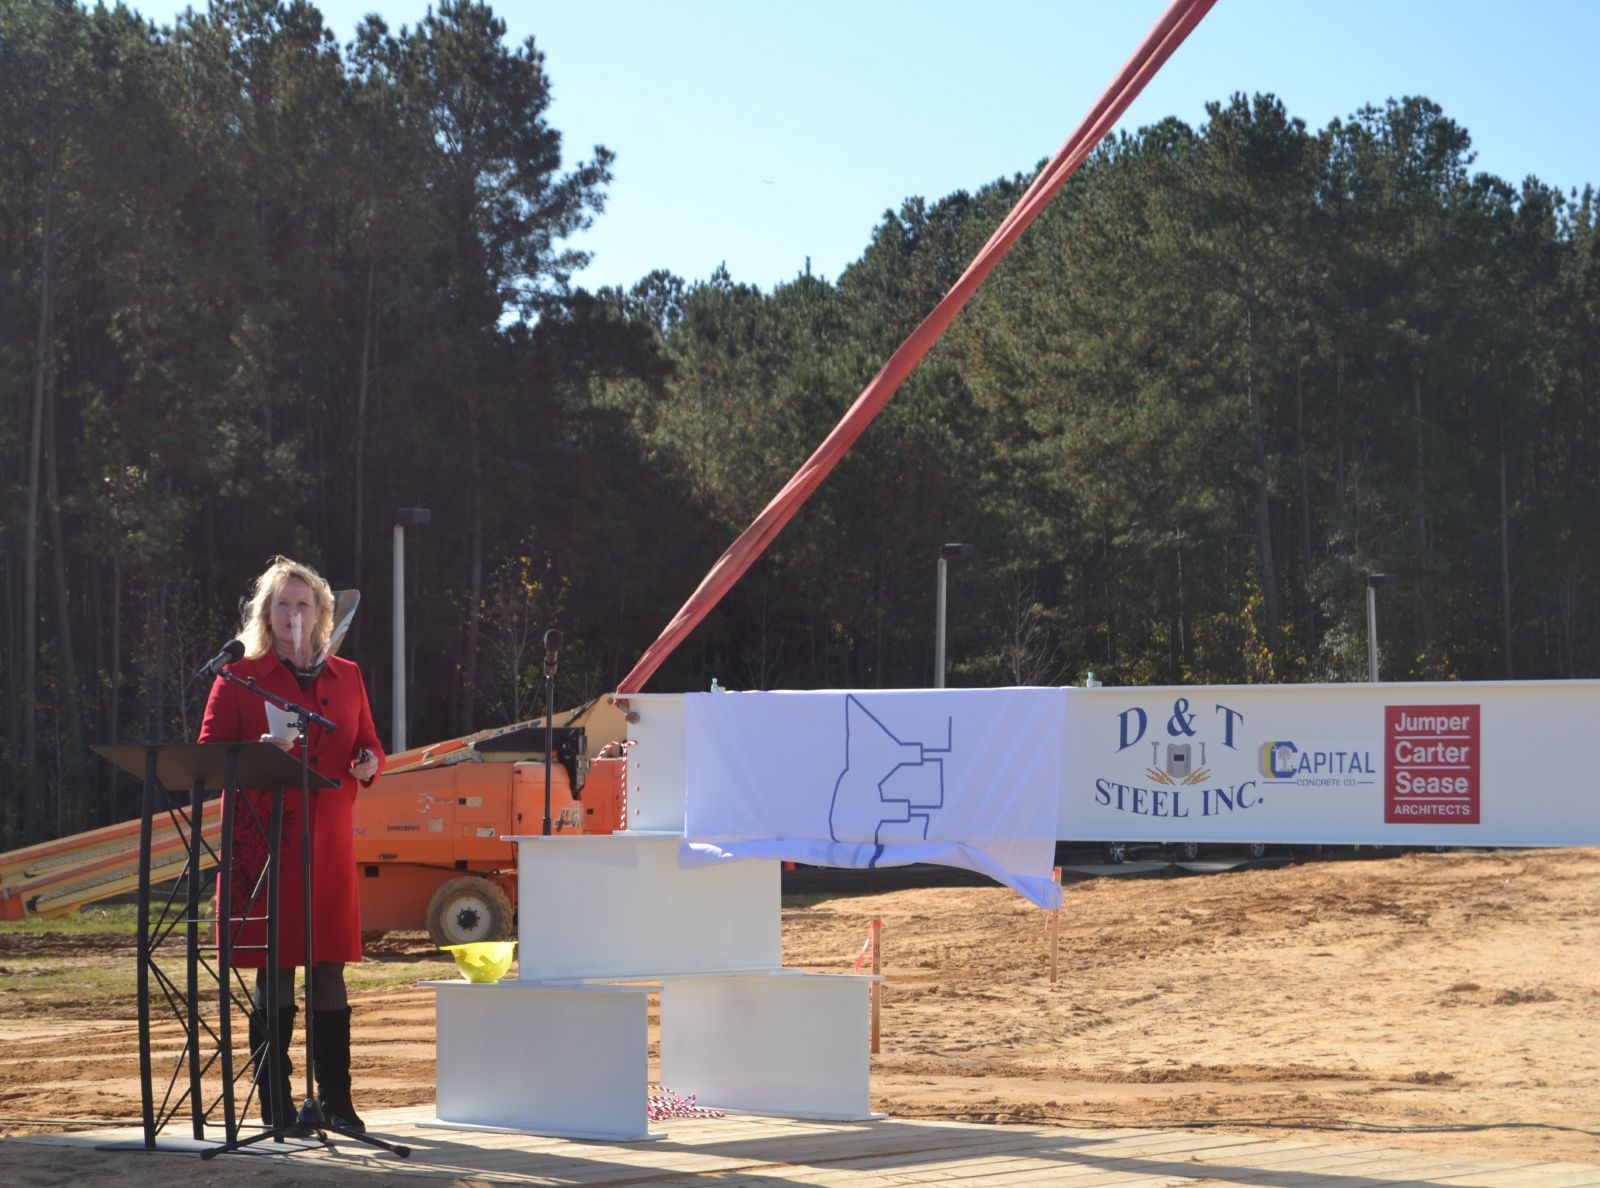 Nephron CEO Lou Kennedy delivers remarks at a beam-raising ceremony on Nov. 17. (Photo/Melinda Waldrop)